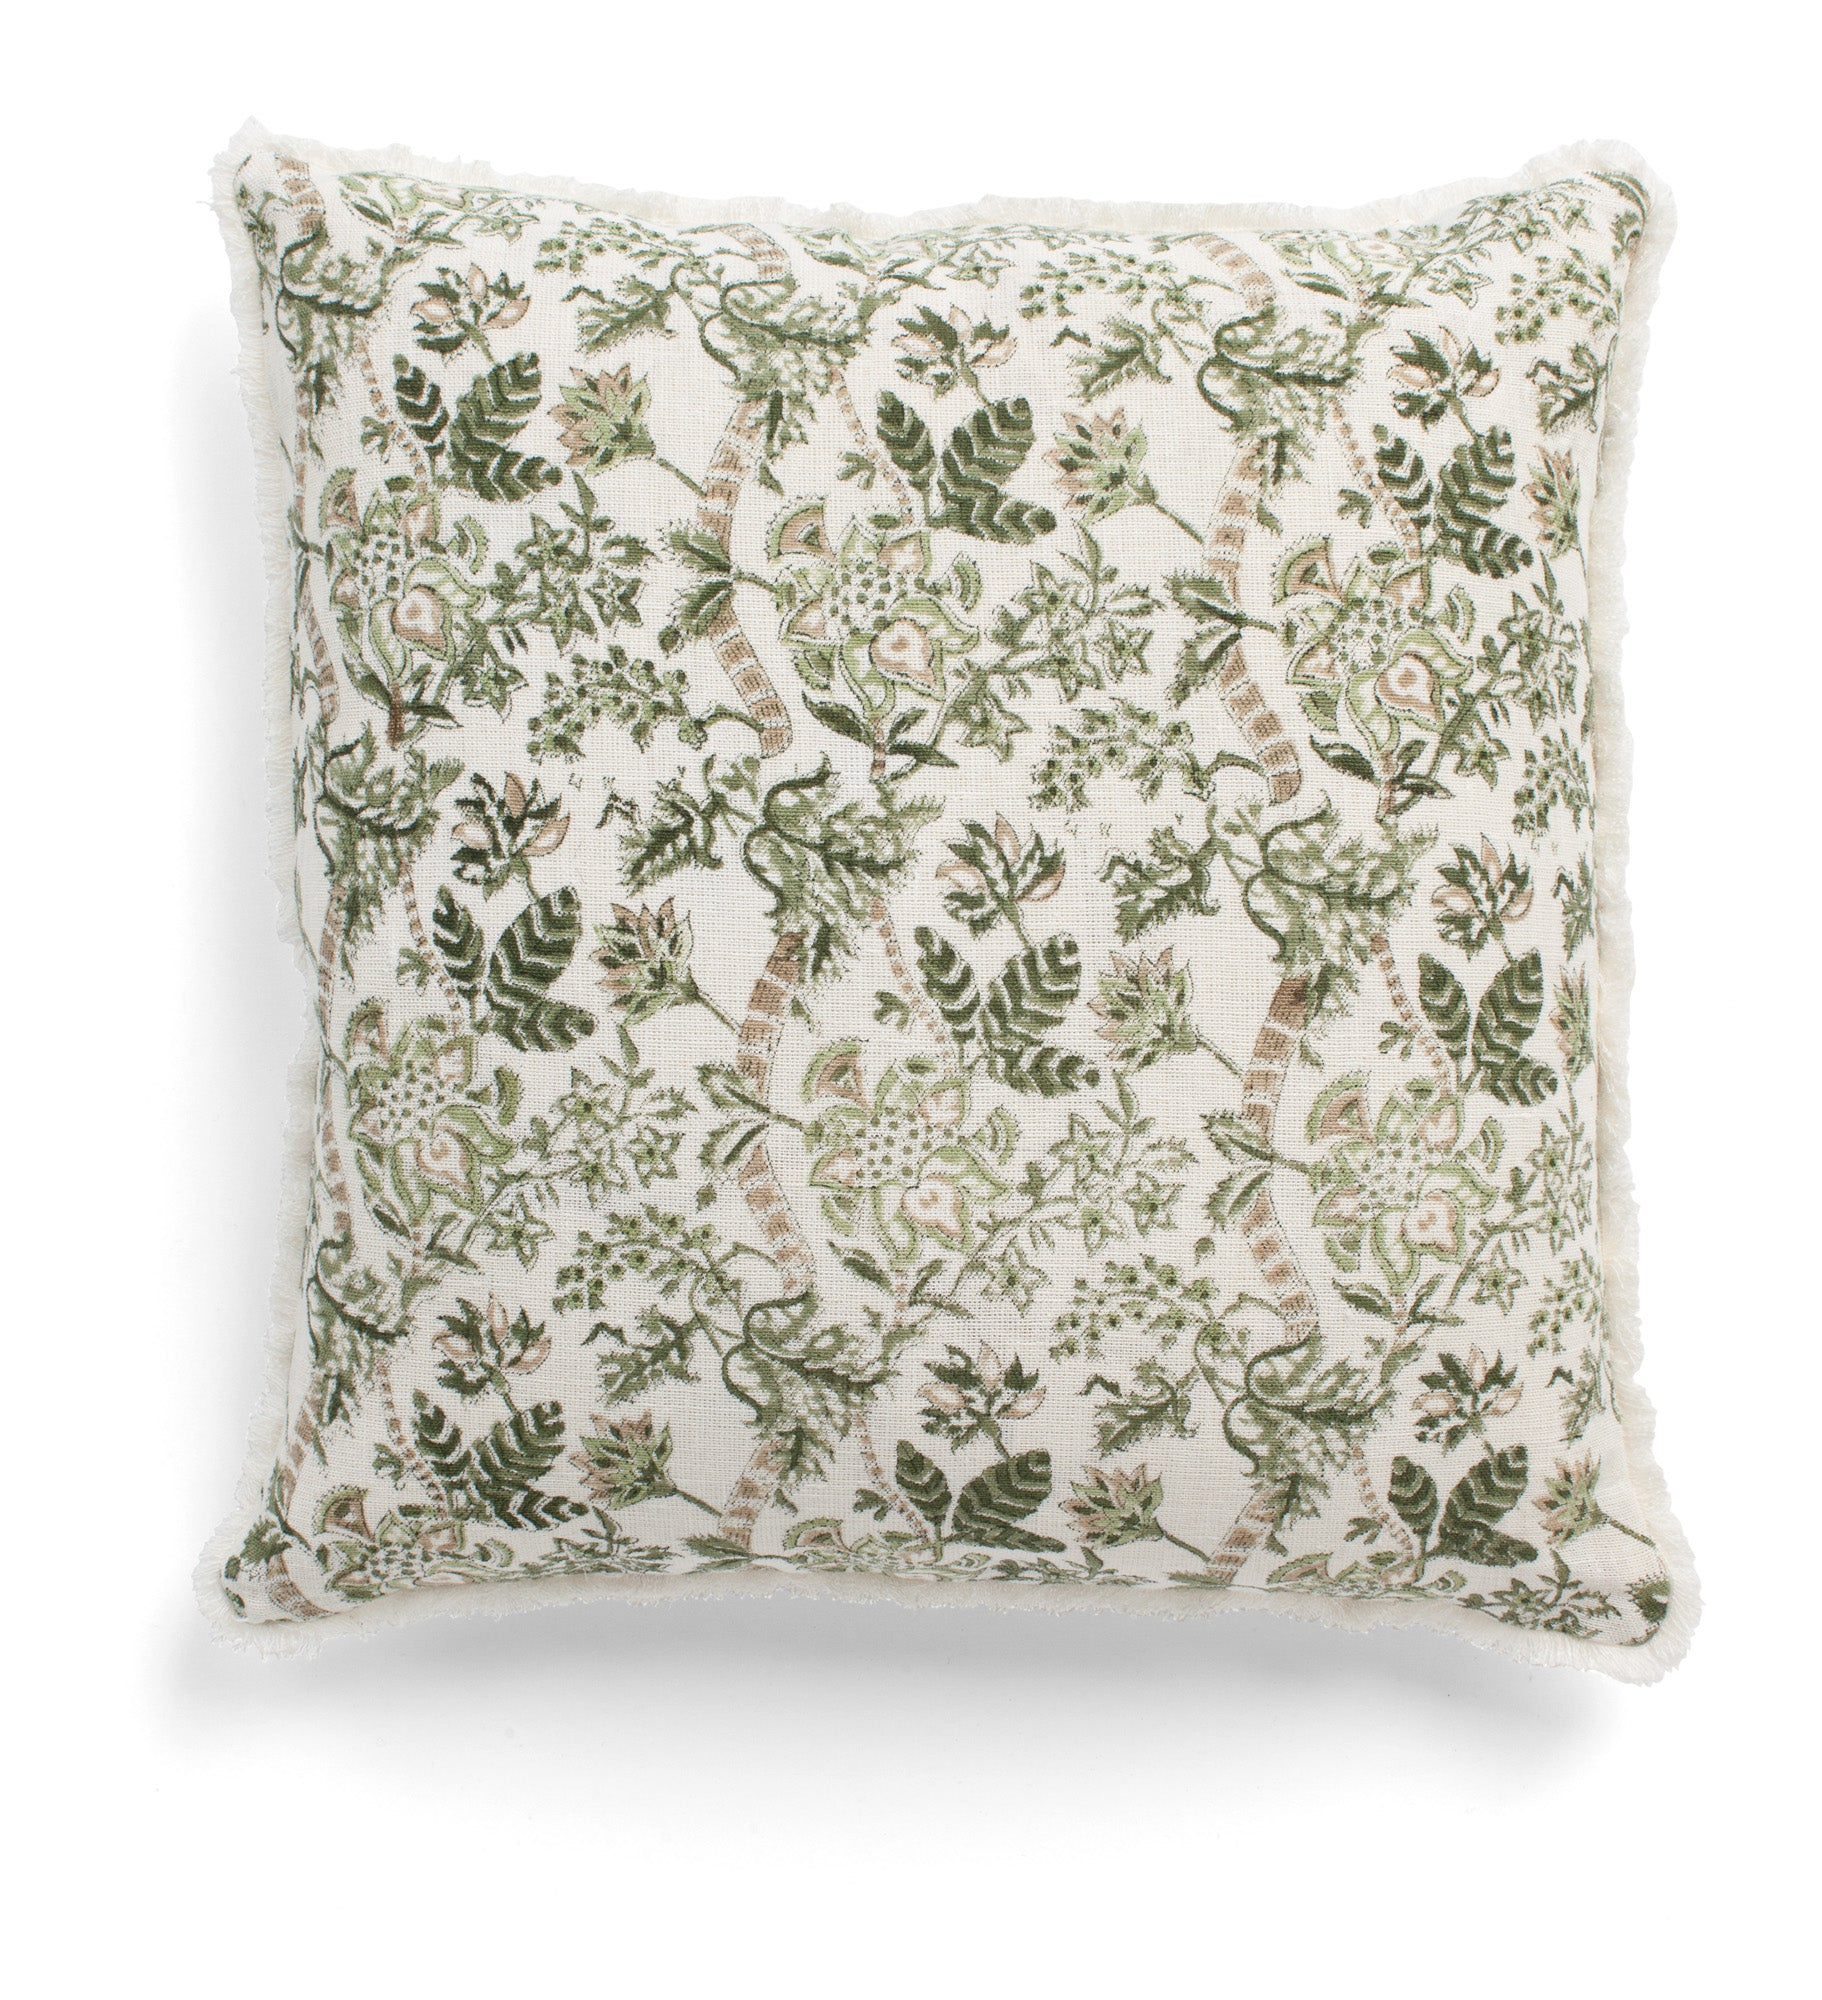 Linen cushion with Floral print in Olive